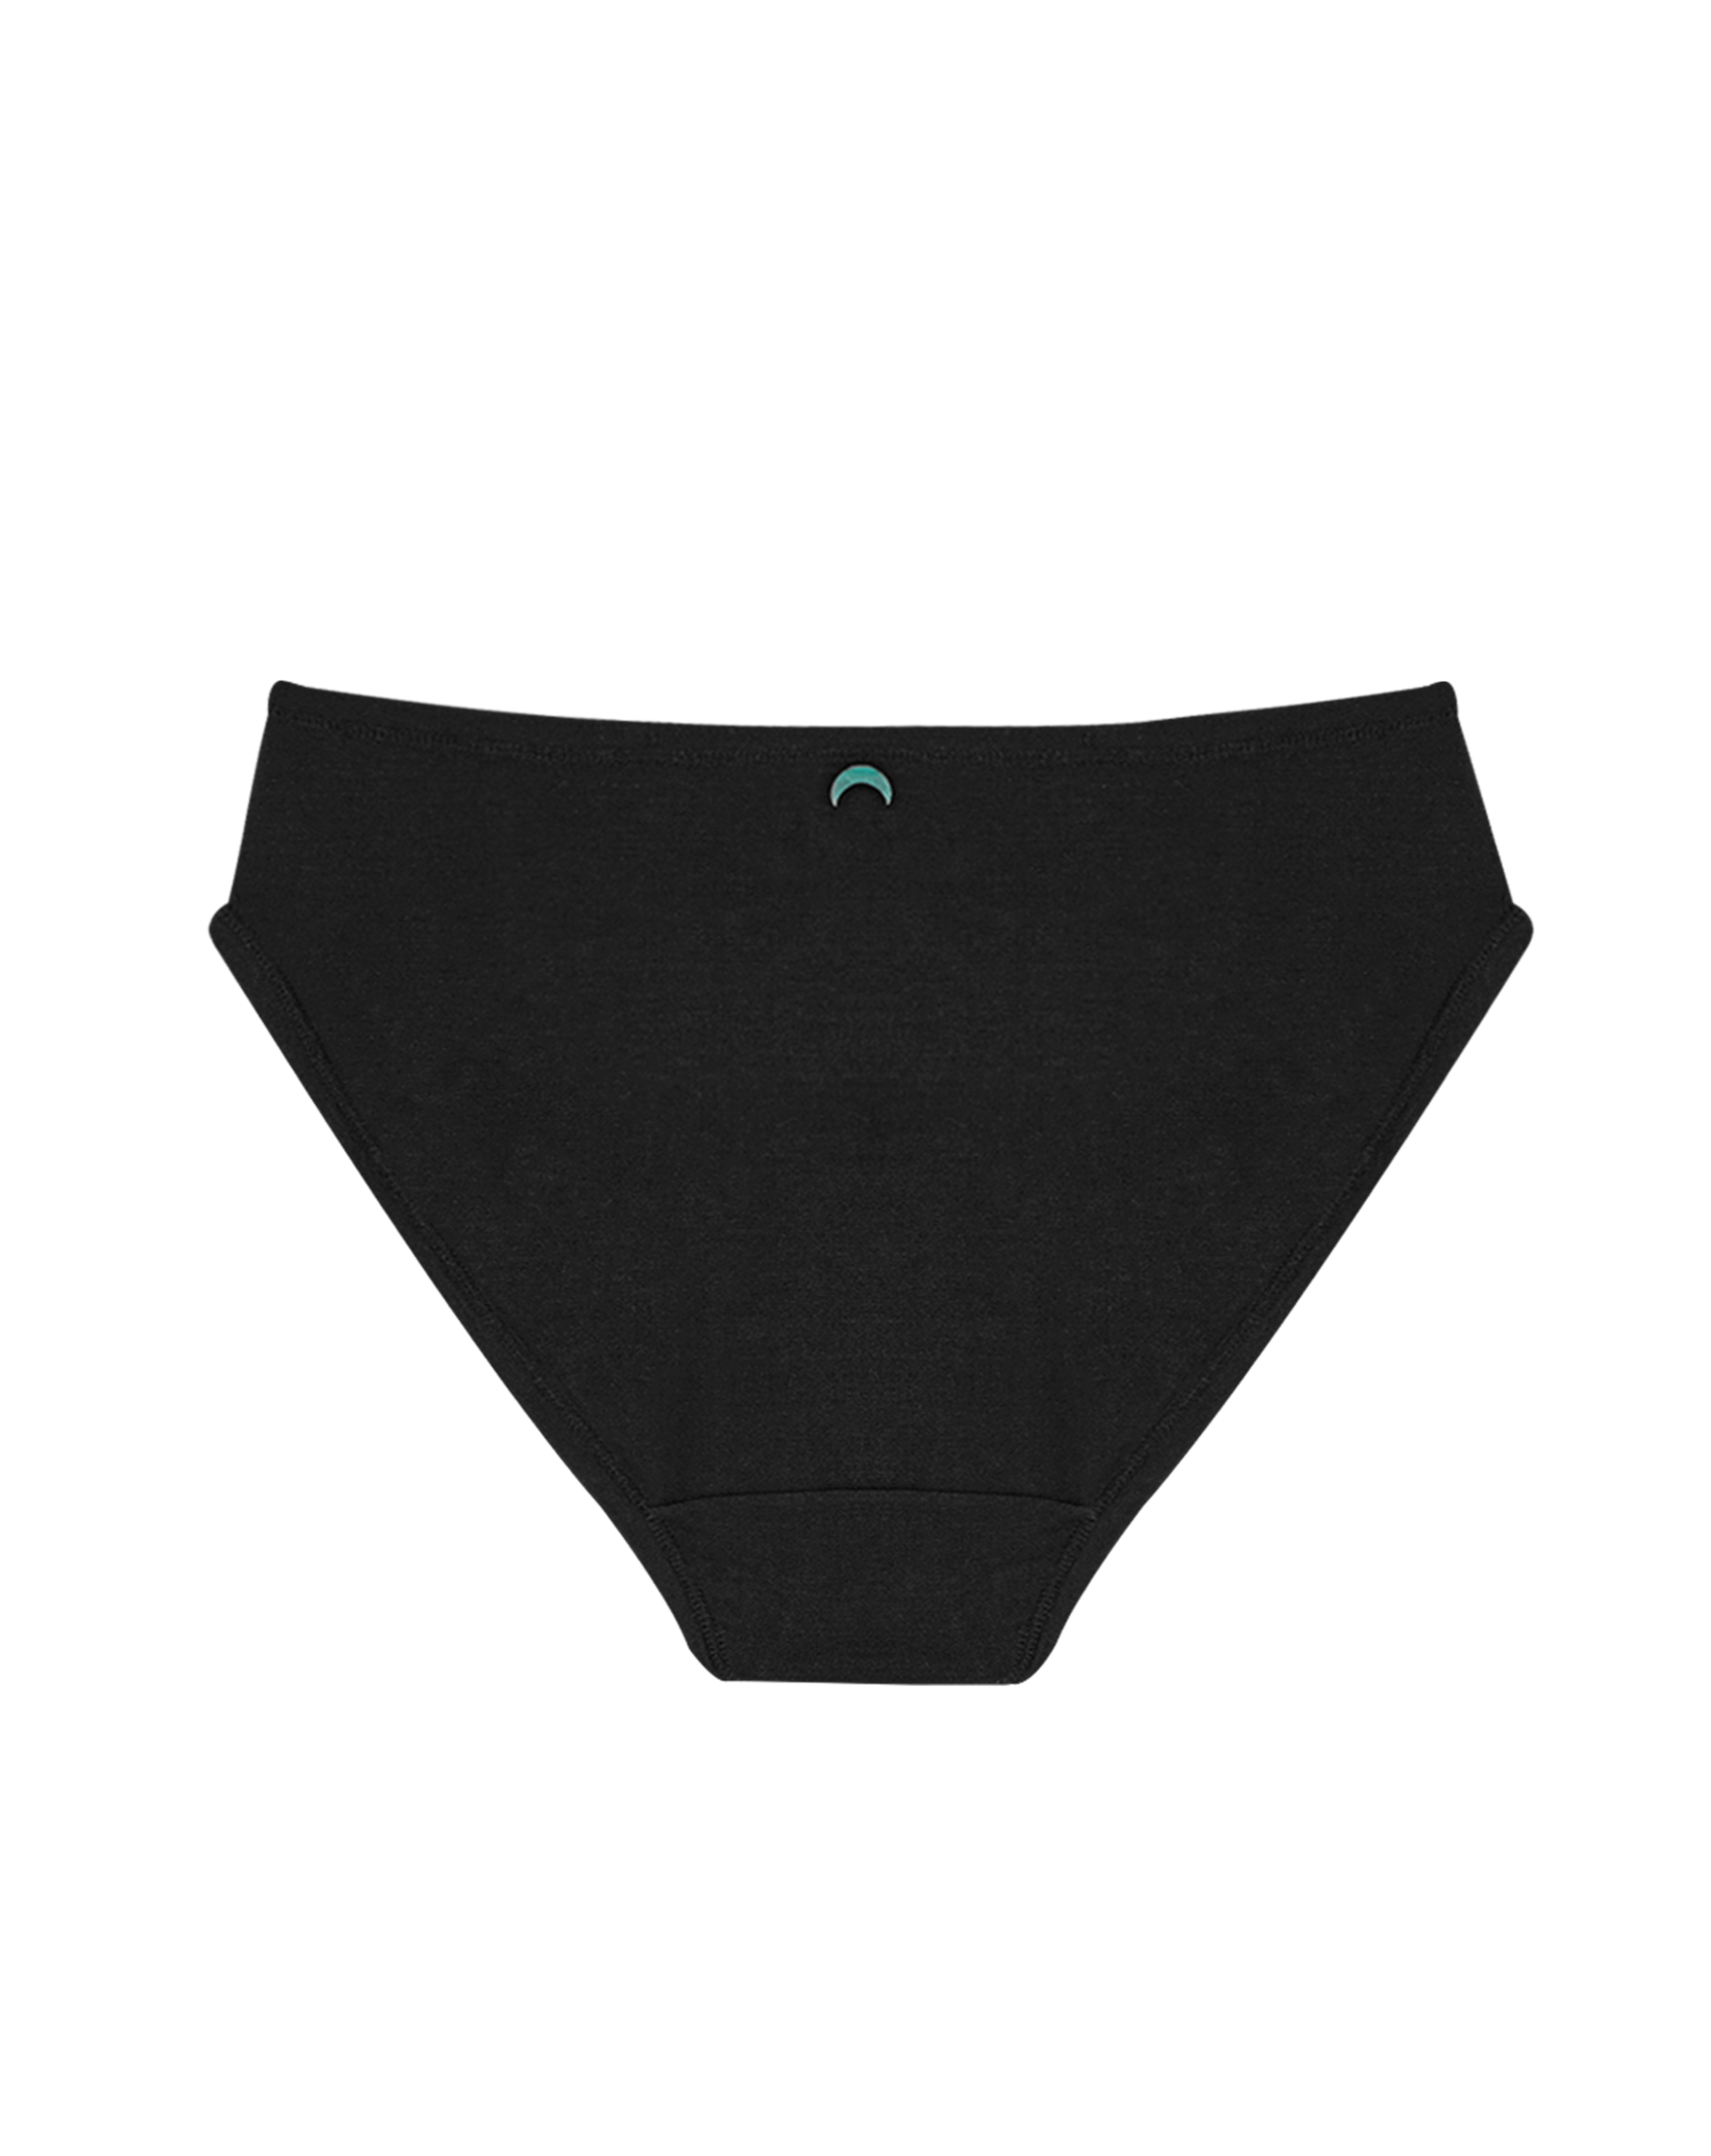 HuHa Underwear Size Chart – Specialty Fittings Lingerie